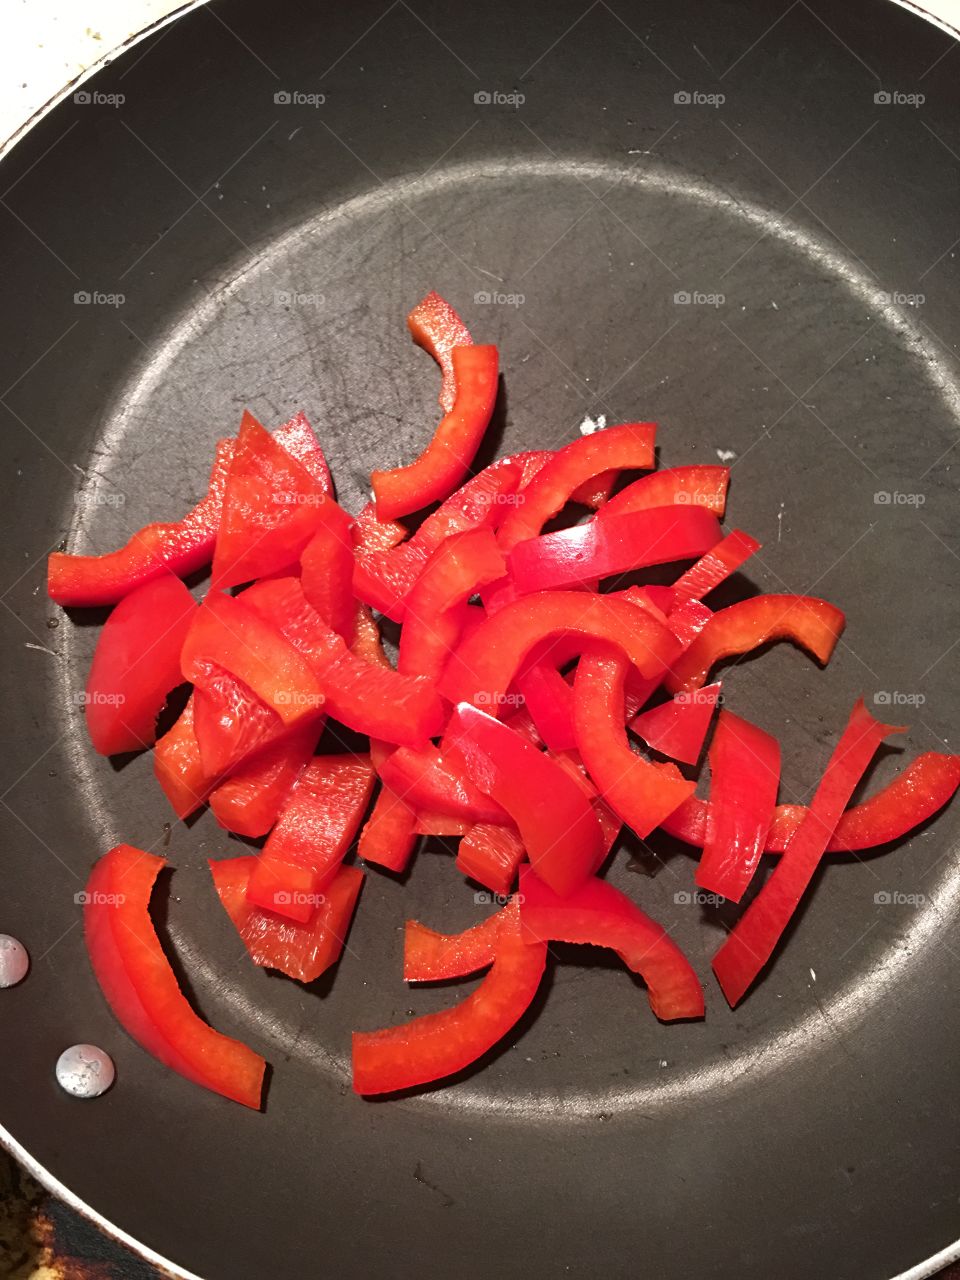 Red bell peppers.